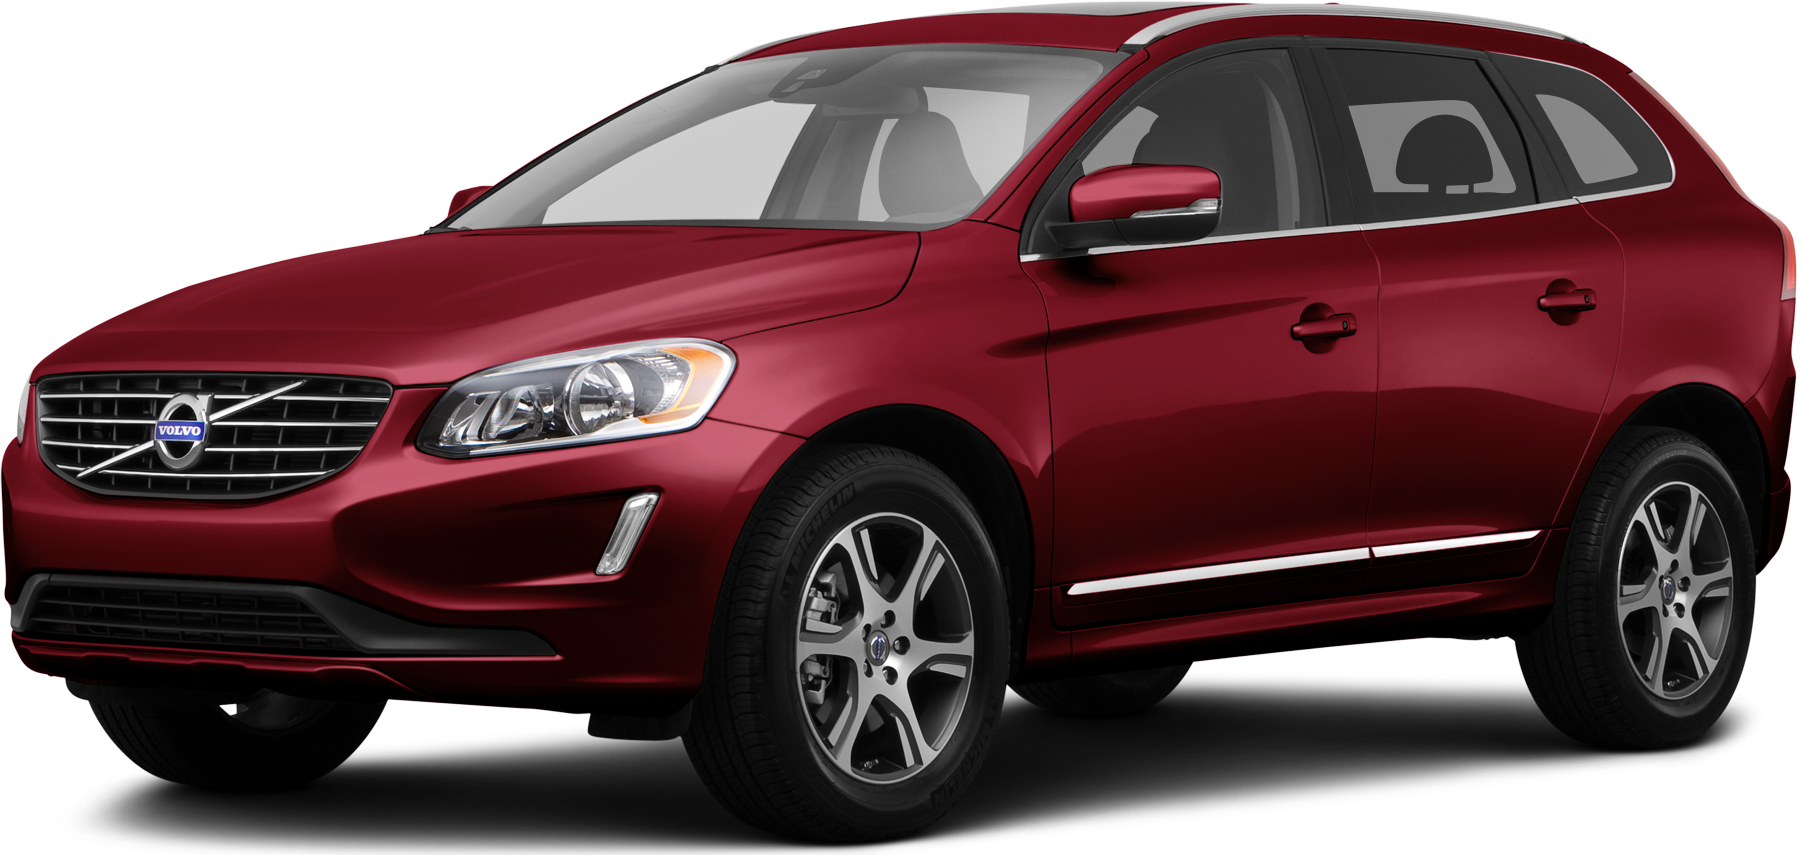 Used 2014 Volvo XC60 for Sale Near Me